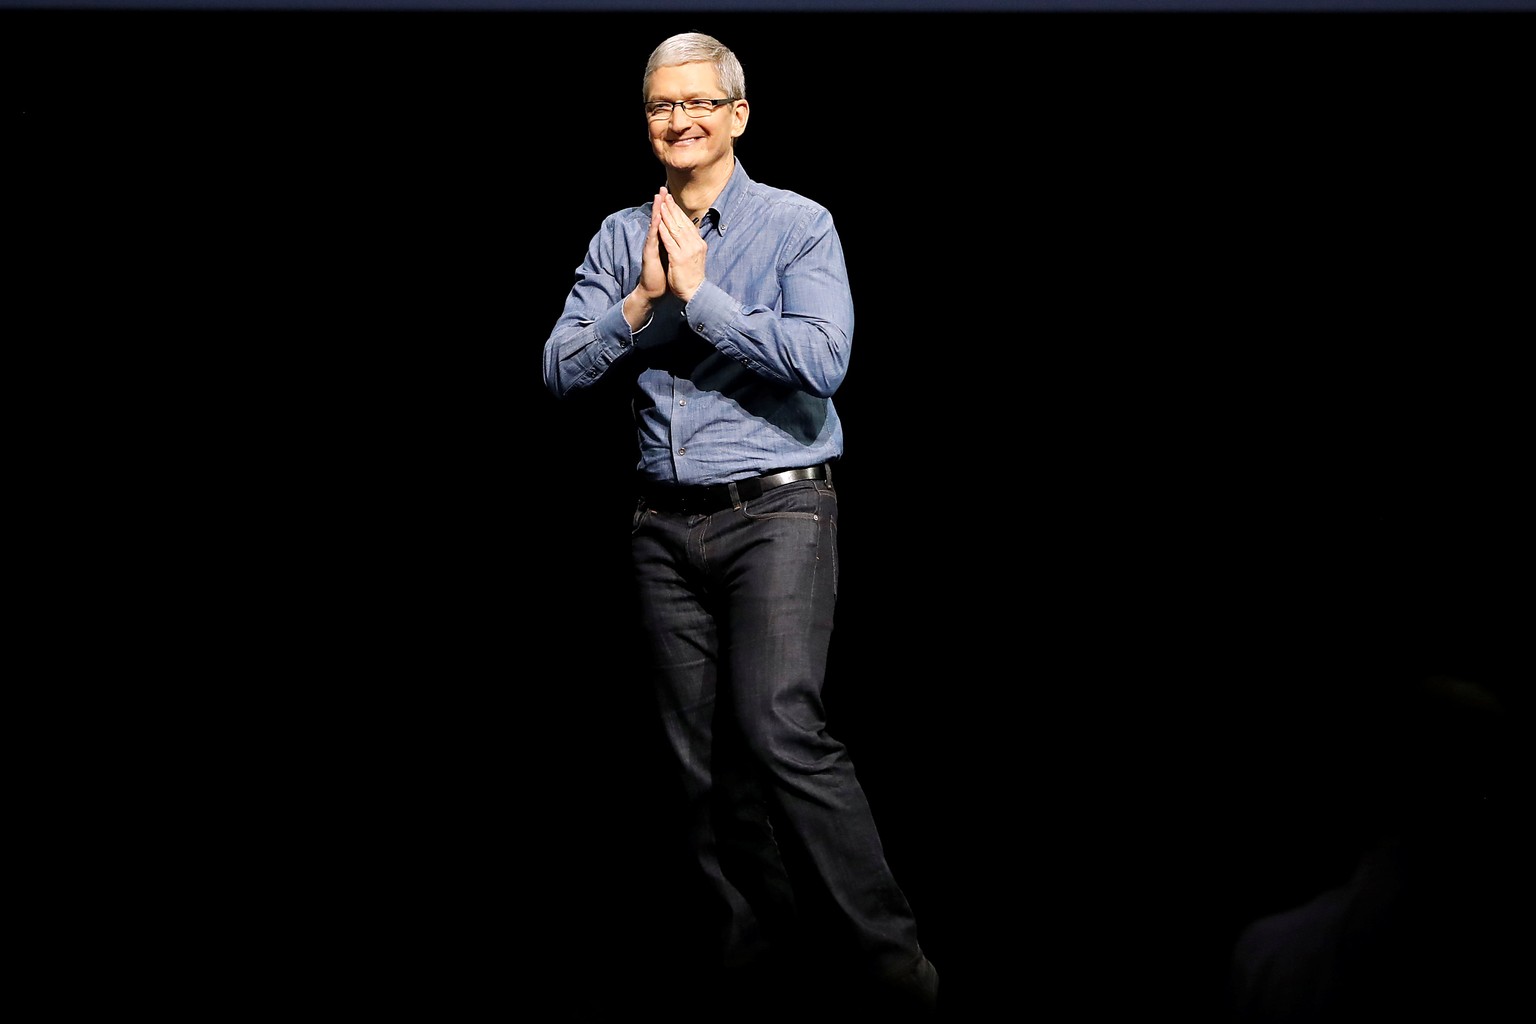 Apple Inc. CEO Tim Cook gestures to the audience as he closes the company&#039;s World Wide Developers Conference keynote in San Francisco, California, U.S., June 13, 2016. REUTERS/Stephen Lam